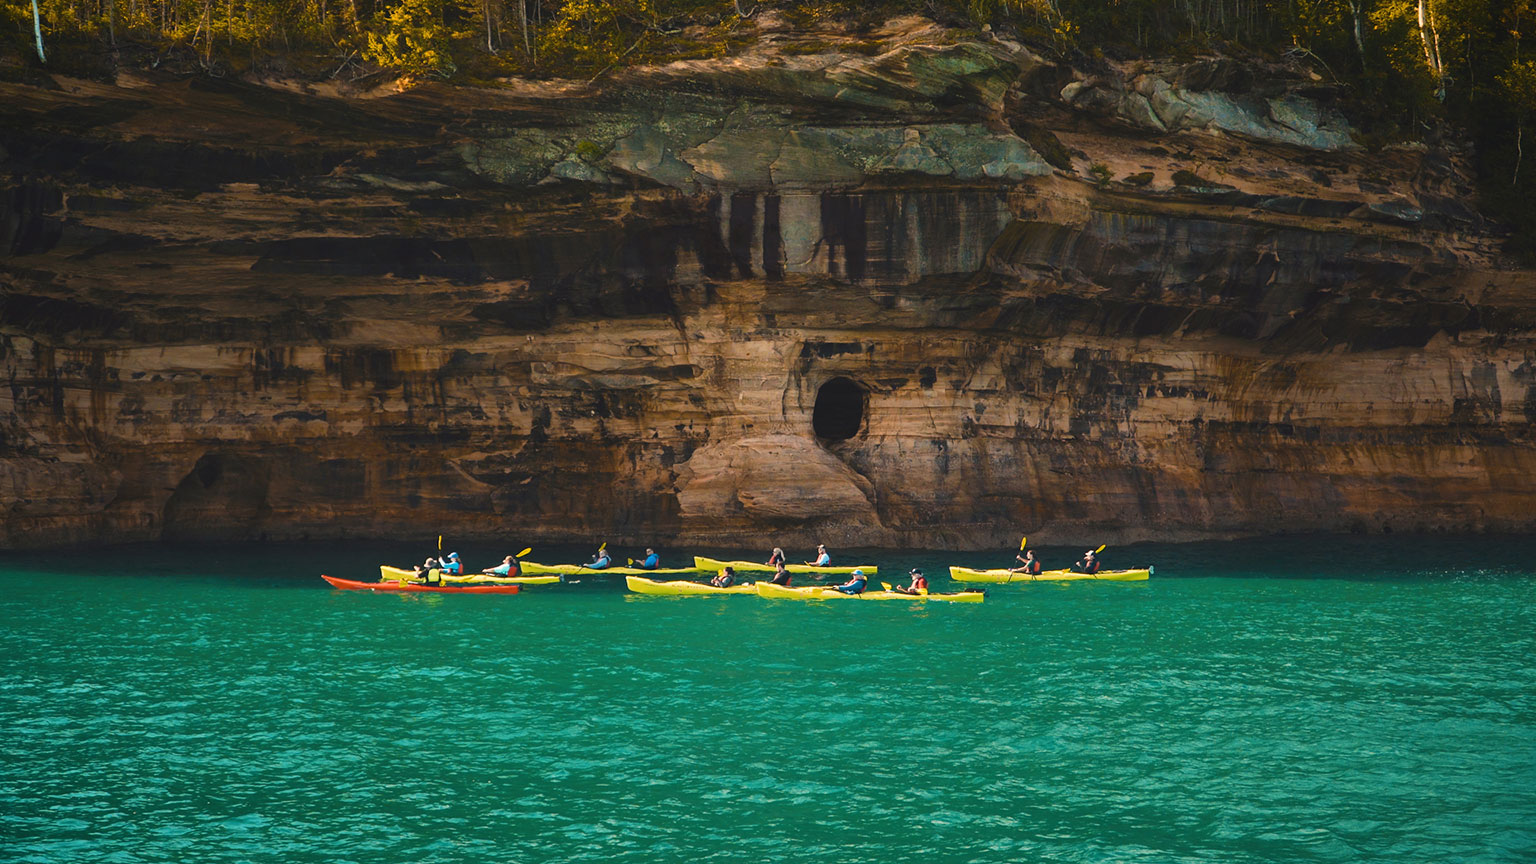 A kayaking tour peering at one of the rock formations. PC: Instagram user @little_pioneer